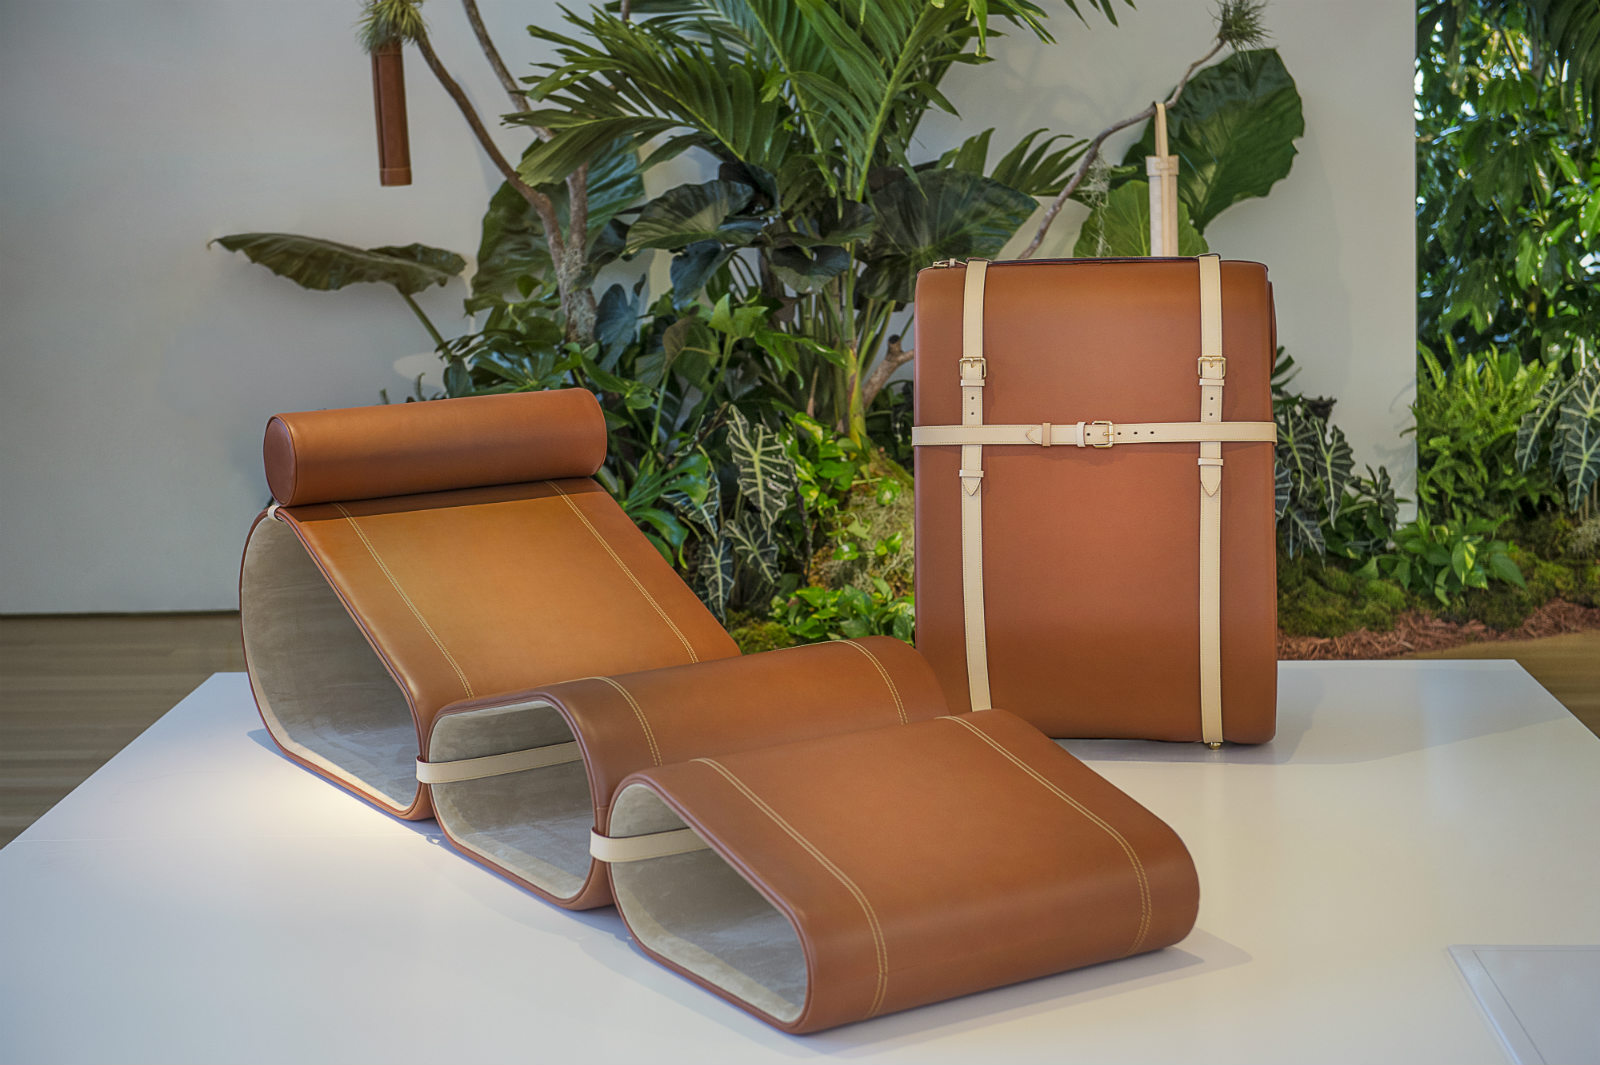 Louis Vuitton's Limited-Edition Objets Nomades Debuts at Design Miami